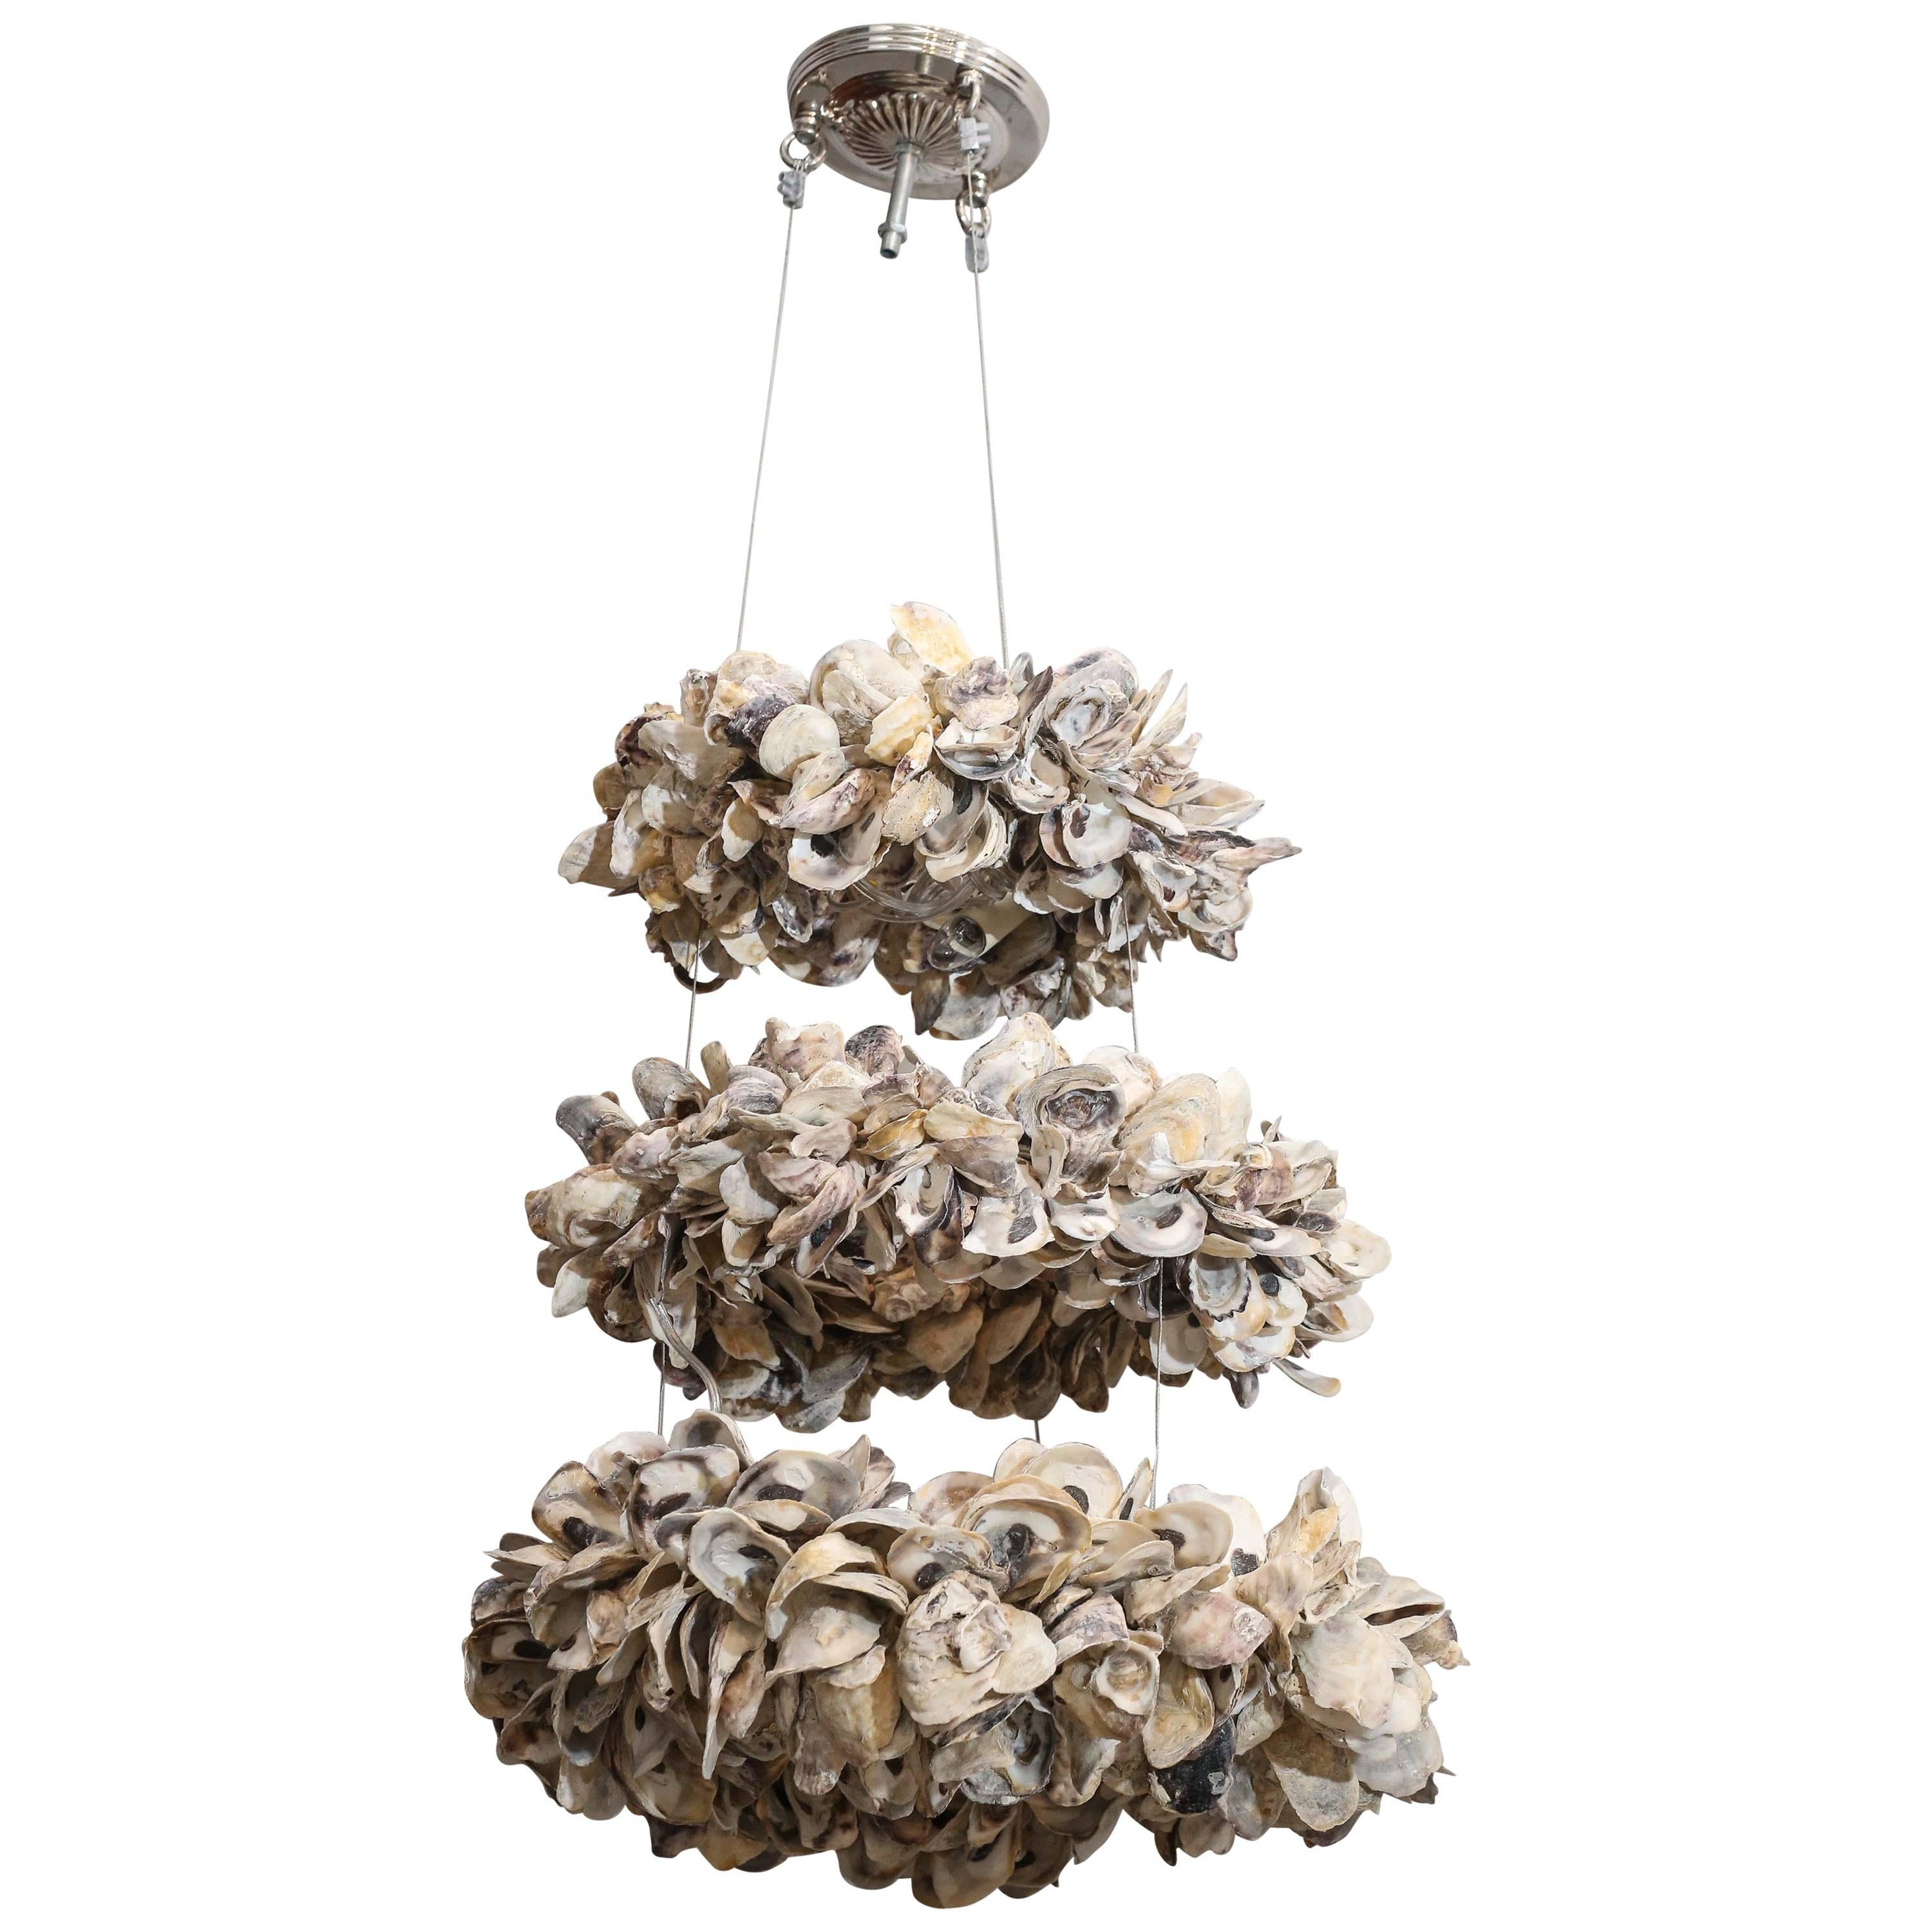 Antica Collection New Design Three-Tier Oyster Chandelier with Ten Lights